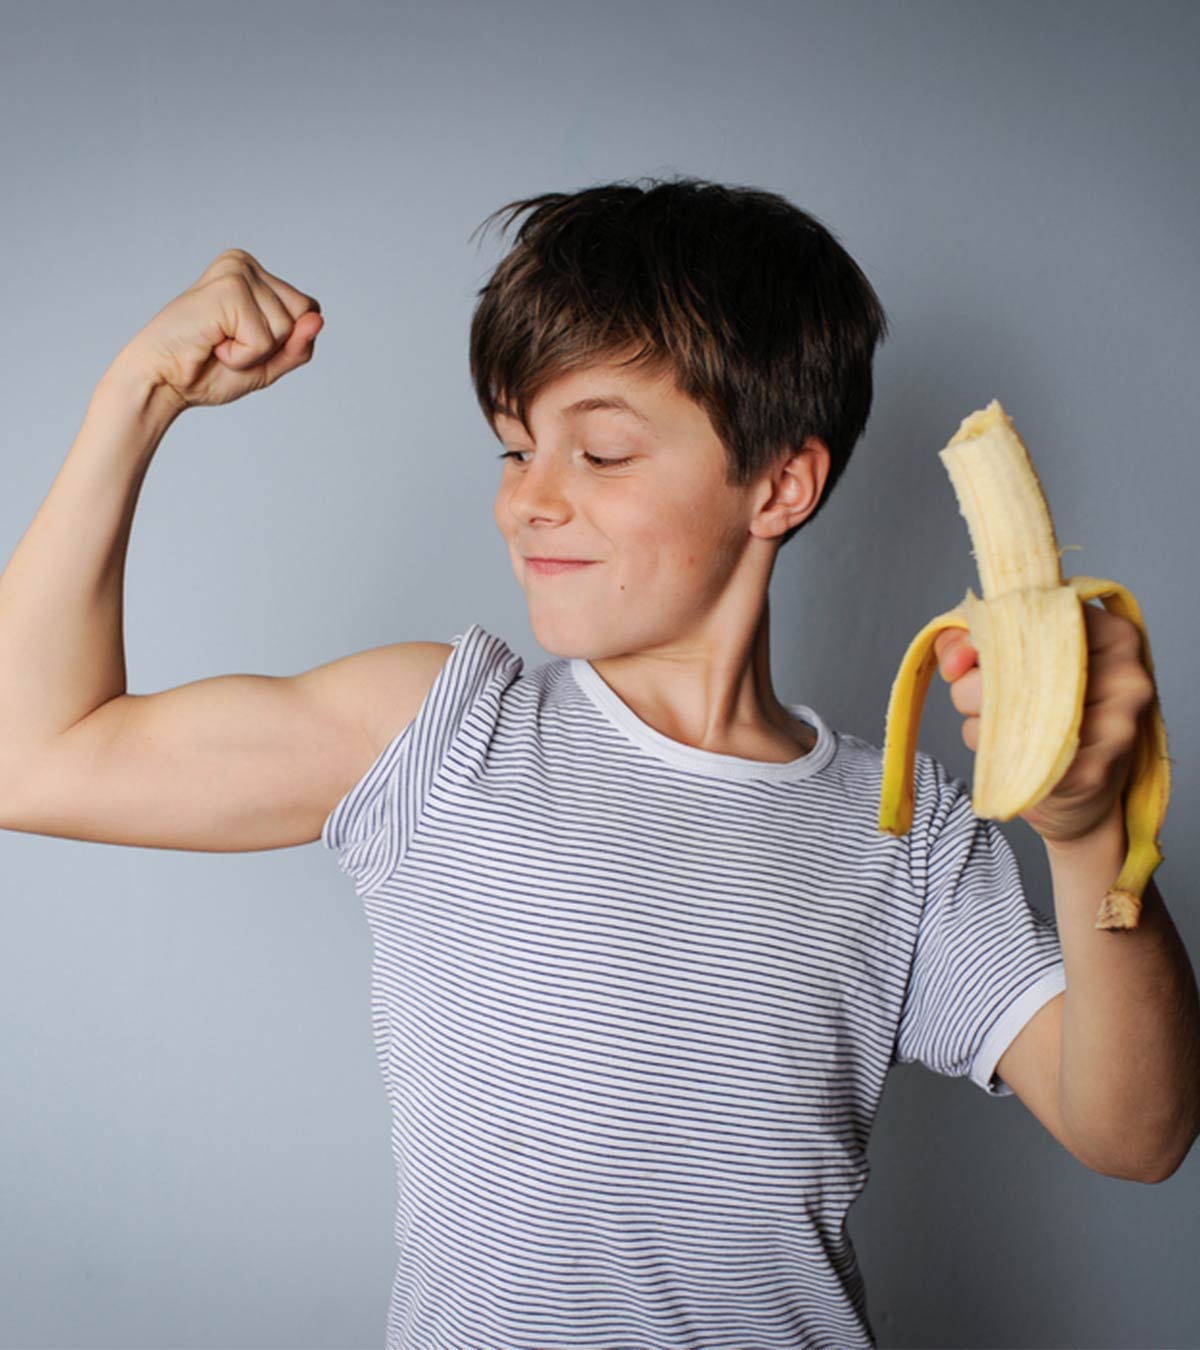 Banana For Kids: Fun Facts, Benefits, And 11 Easy Recipes